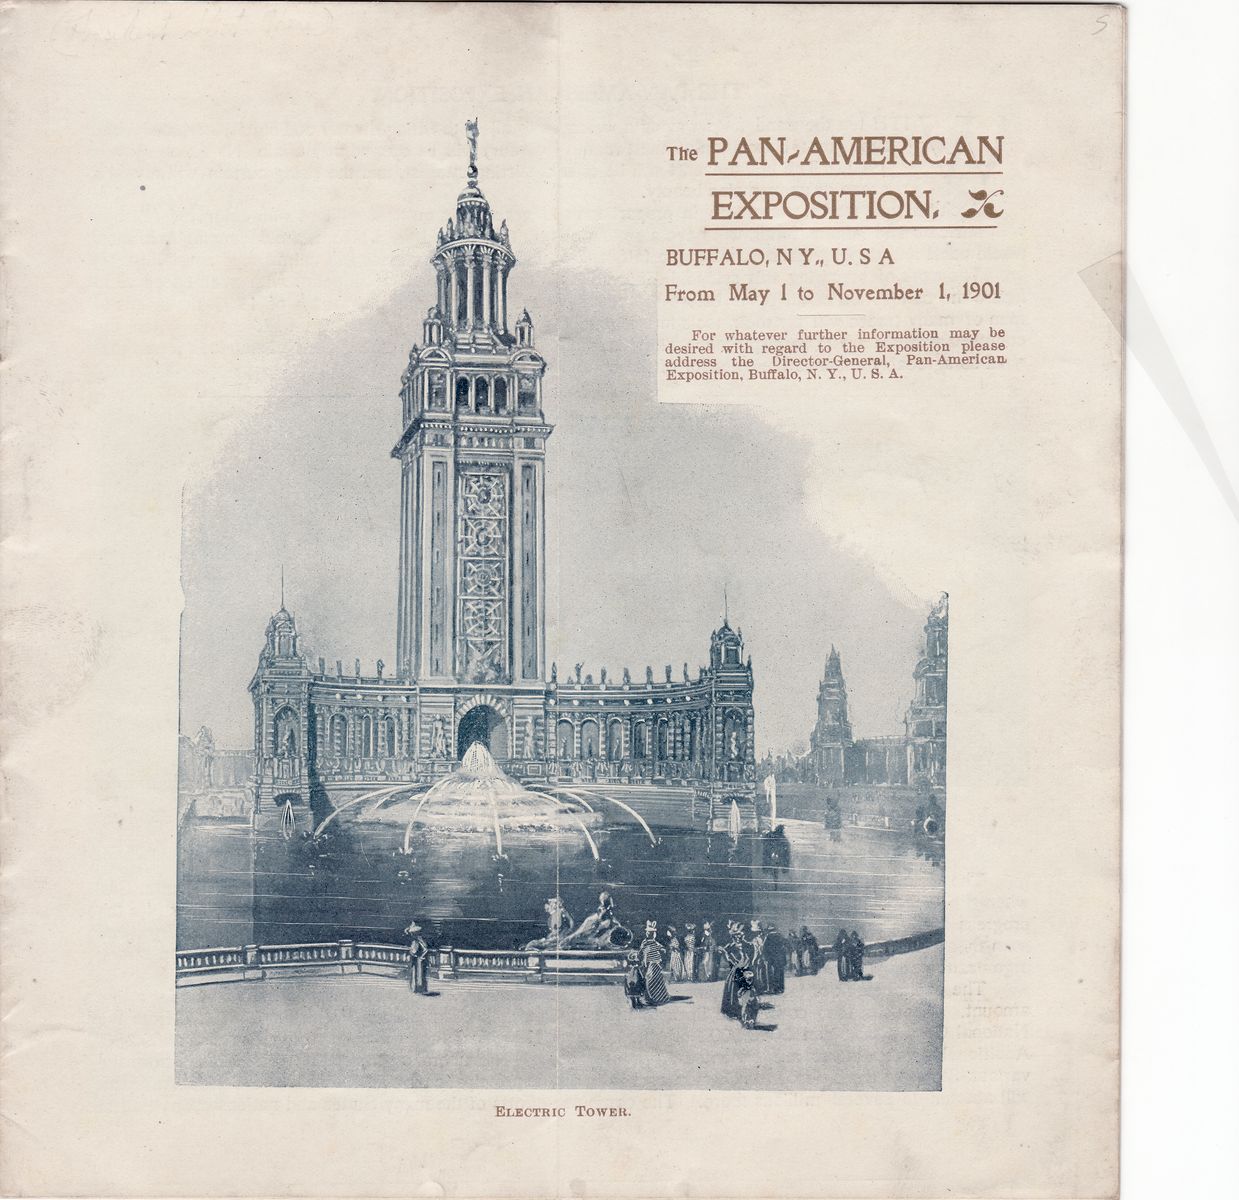 One of the Last Things Signed by William McKinley: A Souvenir Booklet from the Pan-American Exposition